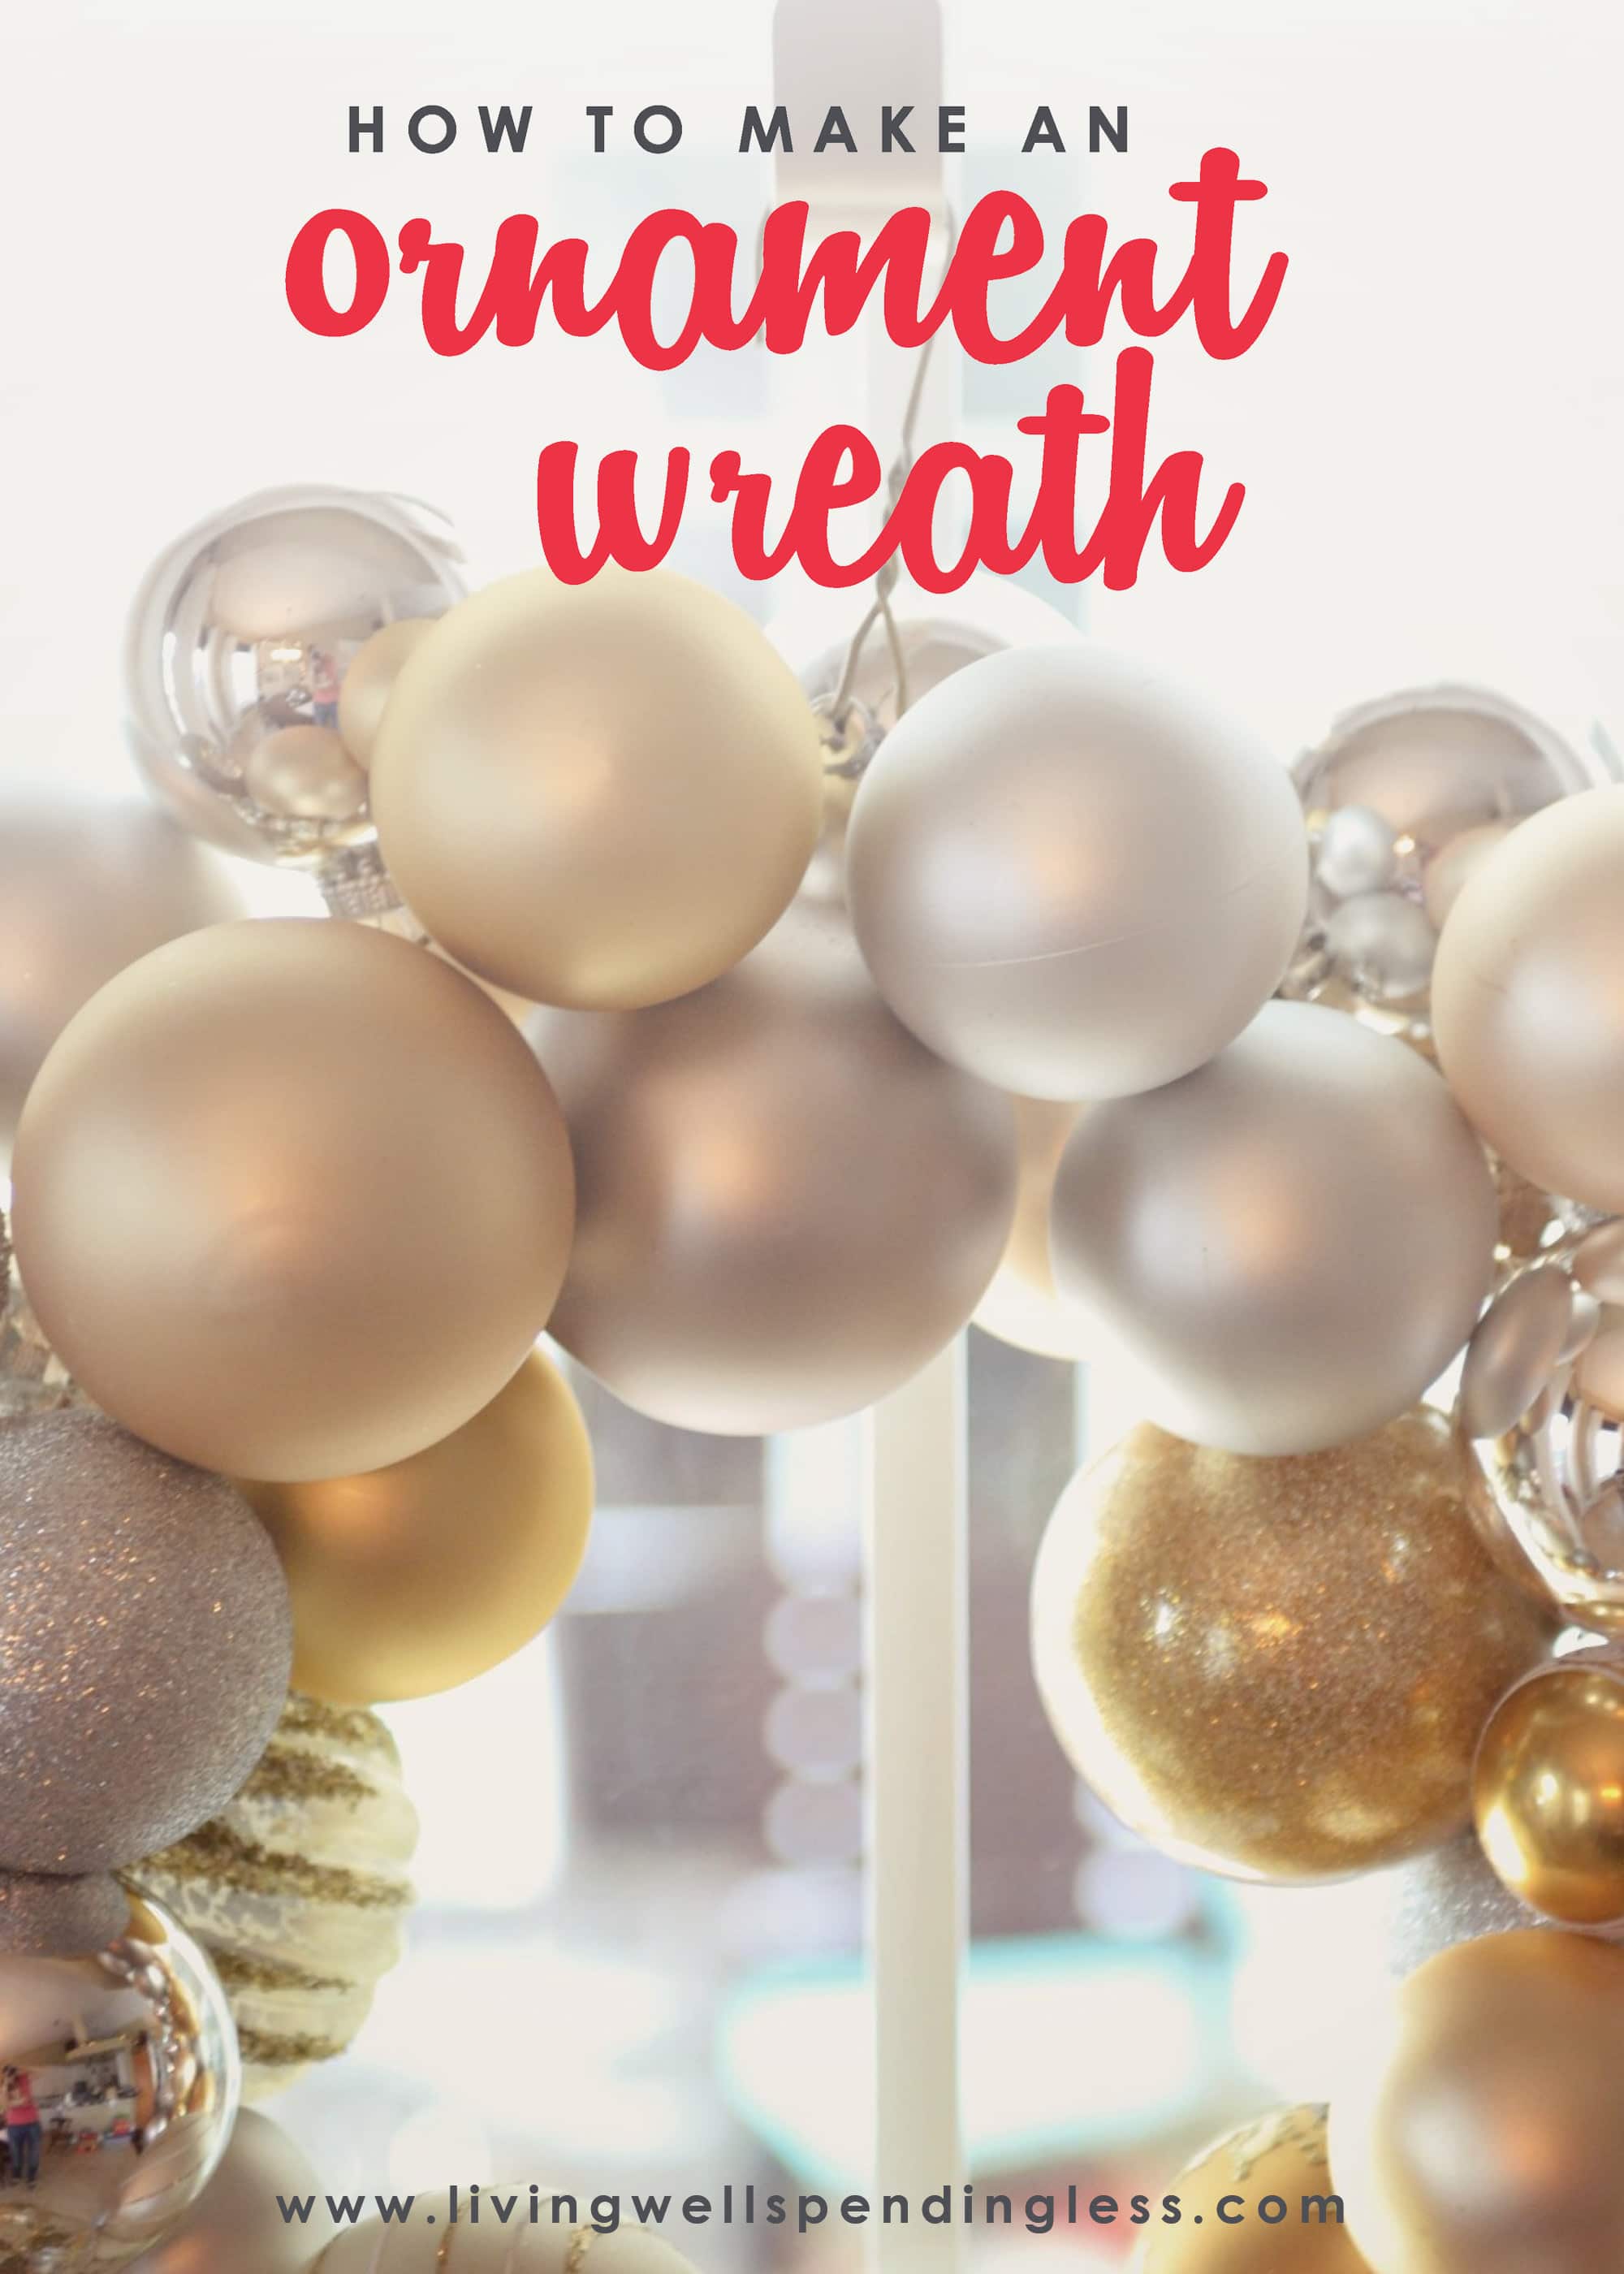 Looking for a fun decor project this Christmas? This DIY ornament wreath is festive and easy to make with wire hangers, pliers, ribbon and spare ornaments!